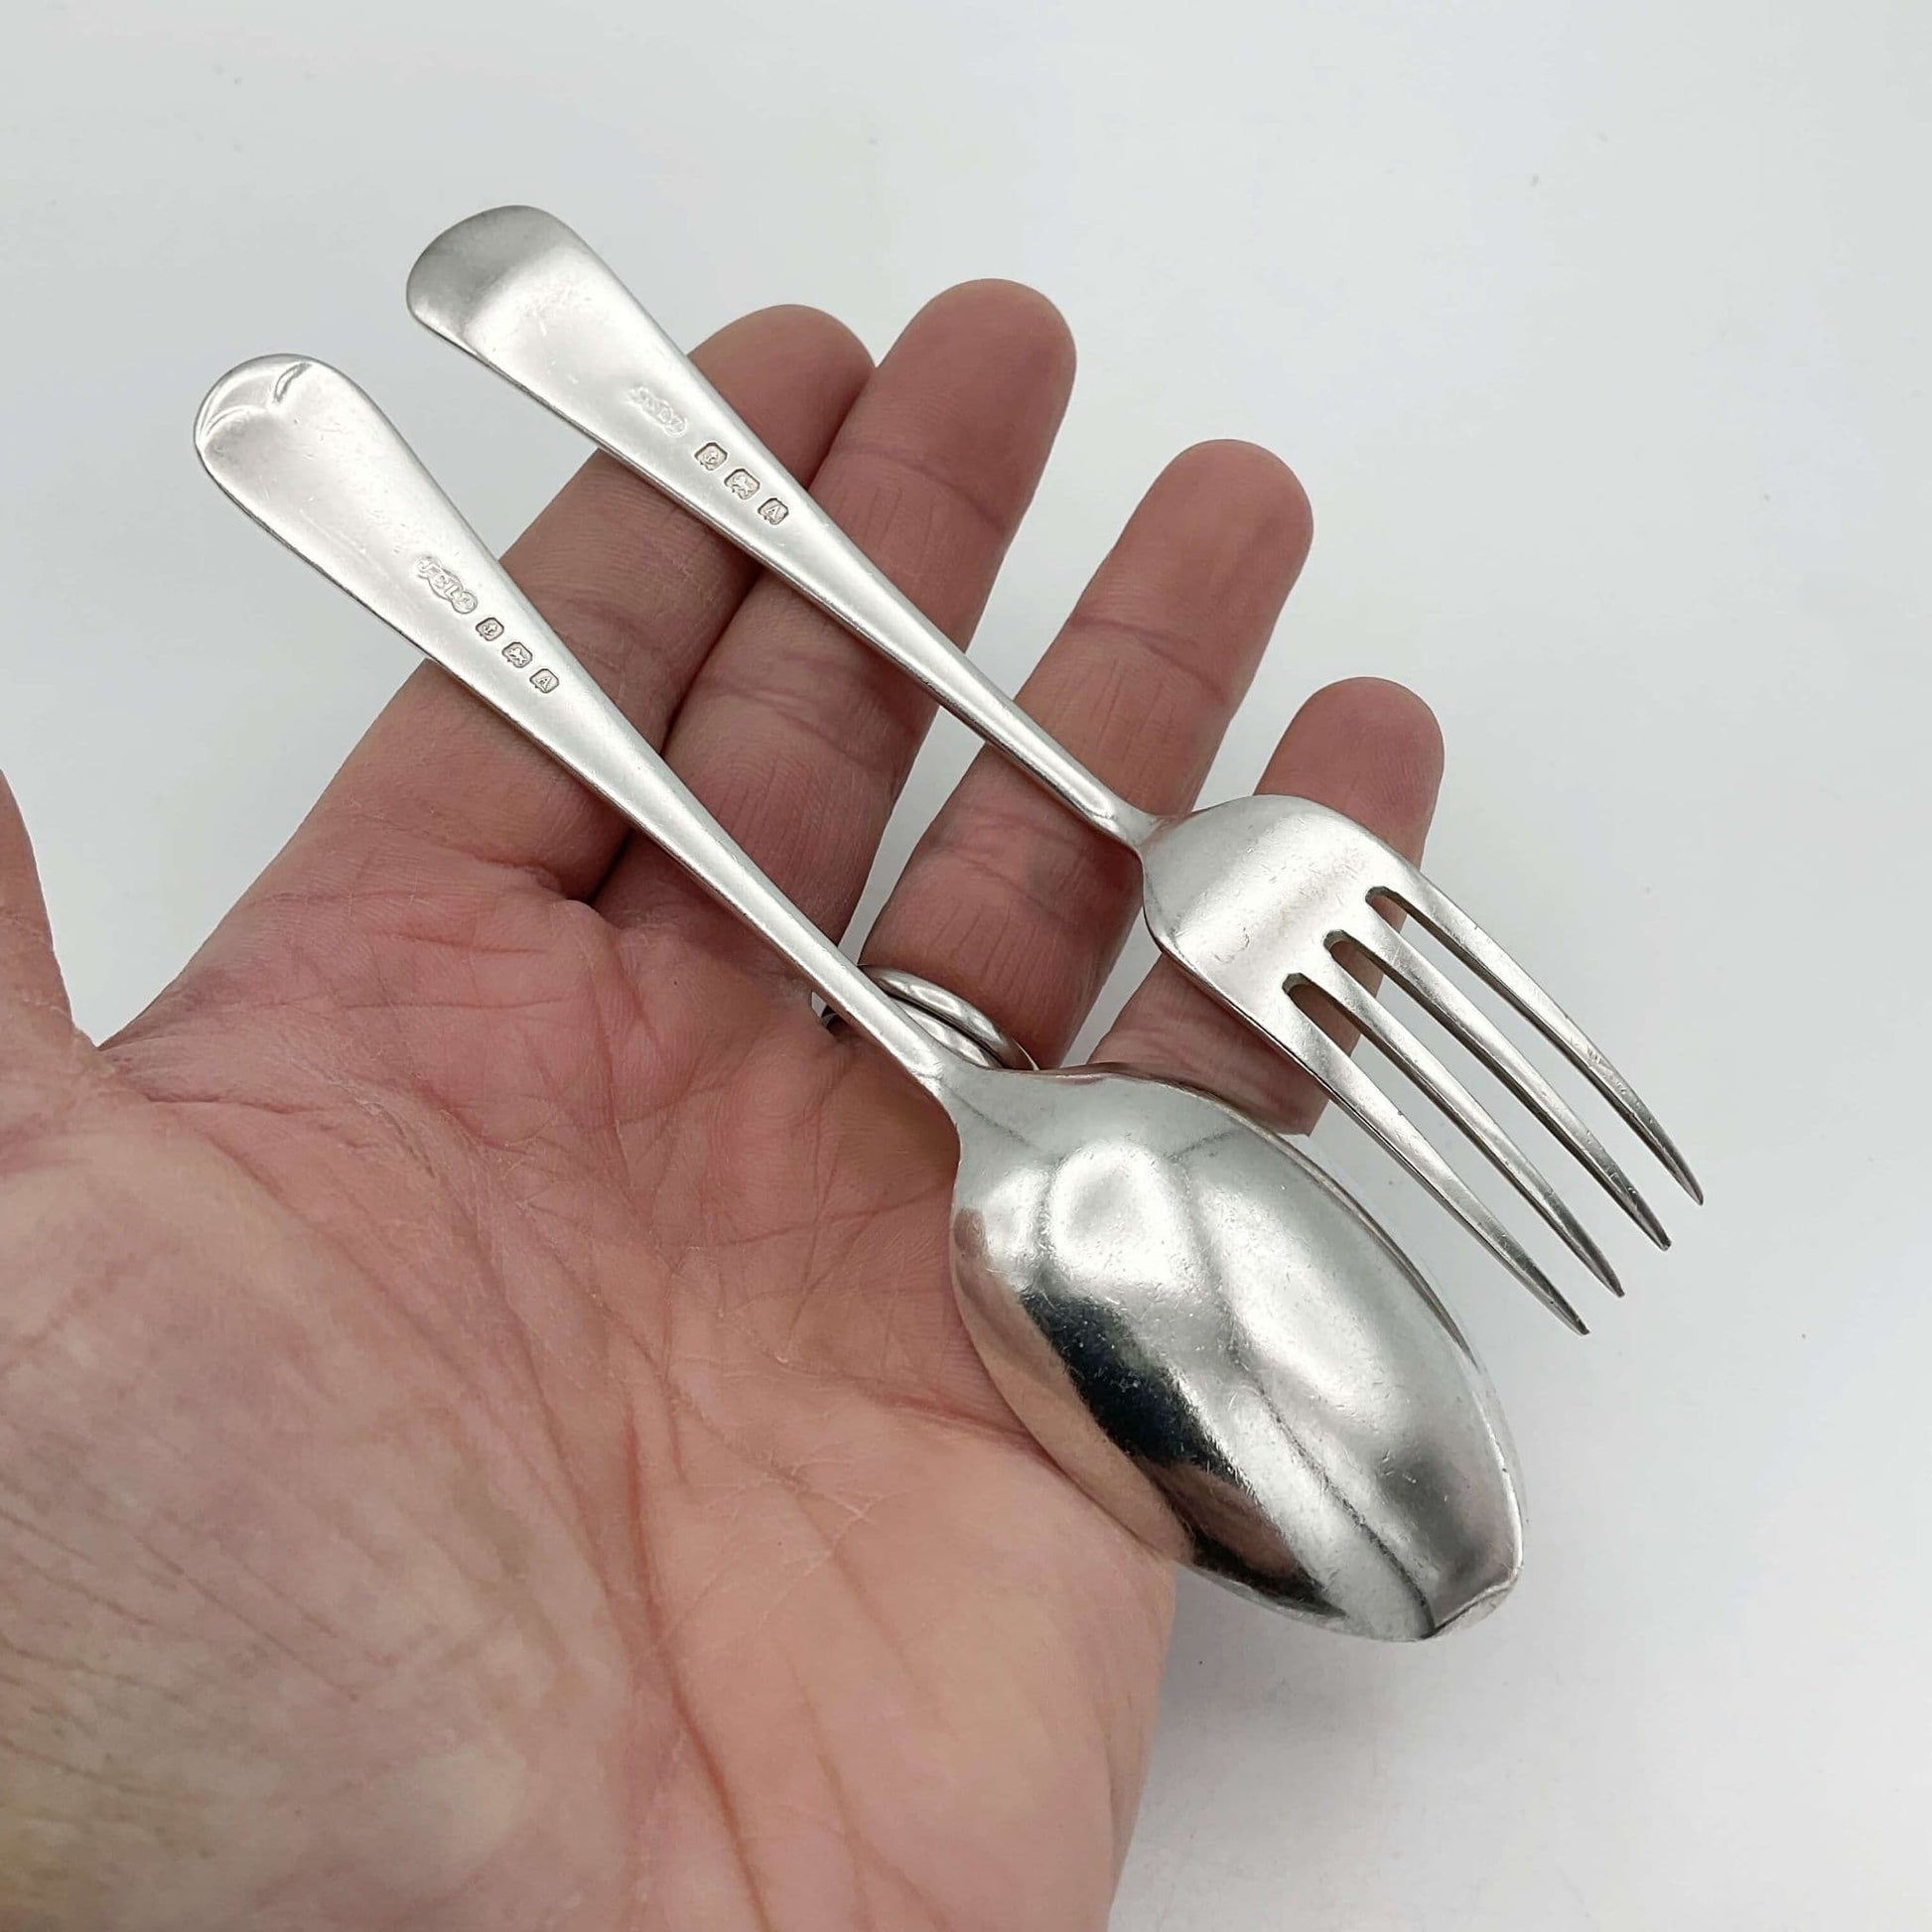 Small spoon and fork set upside down on a hand